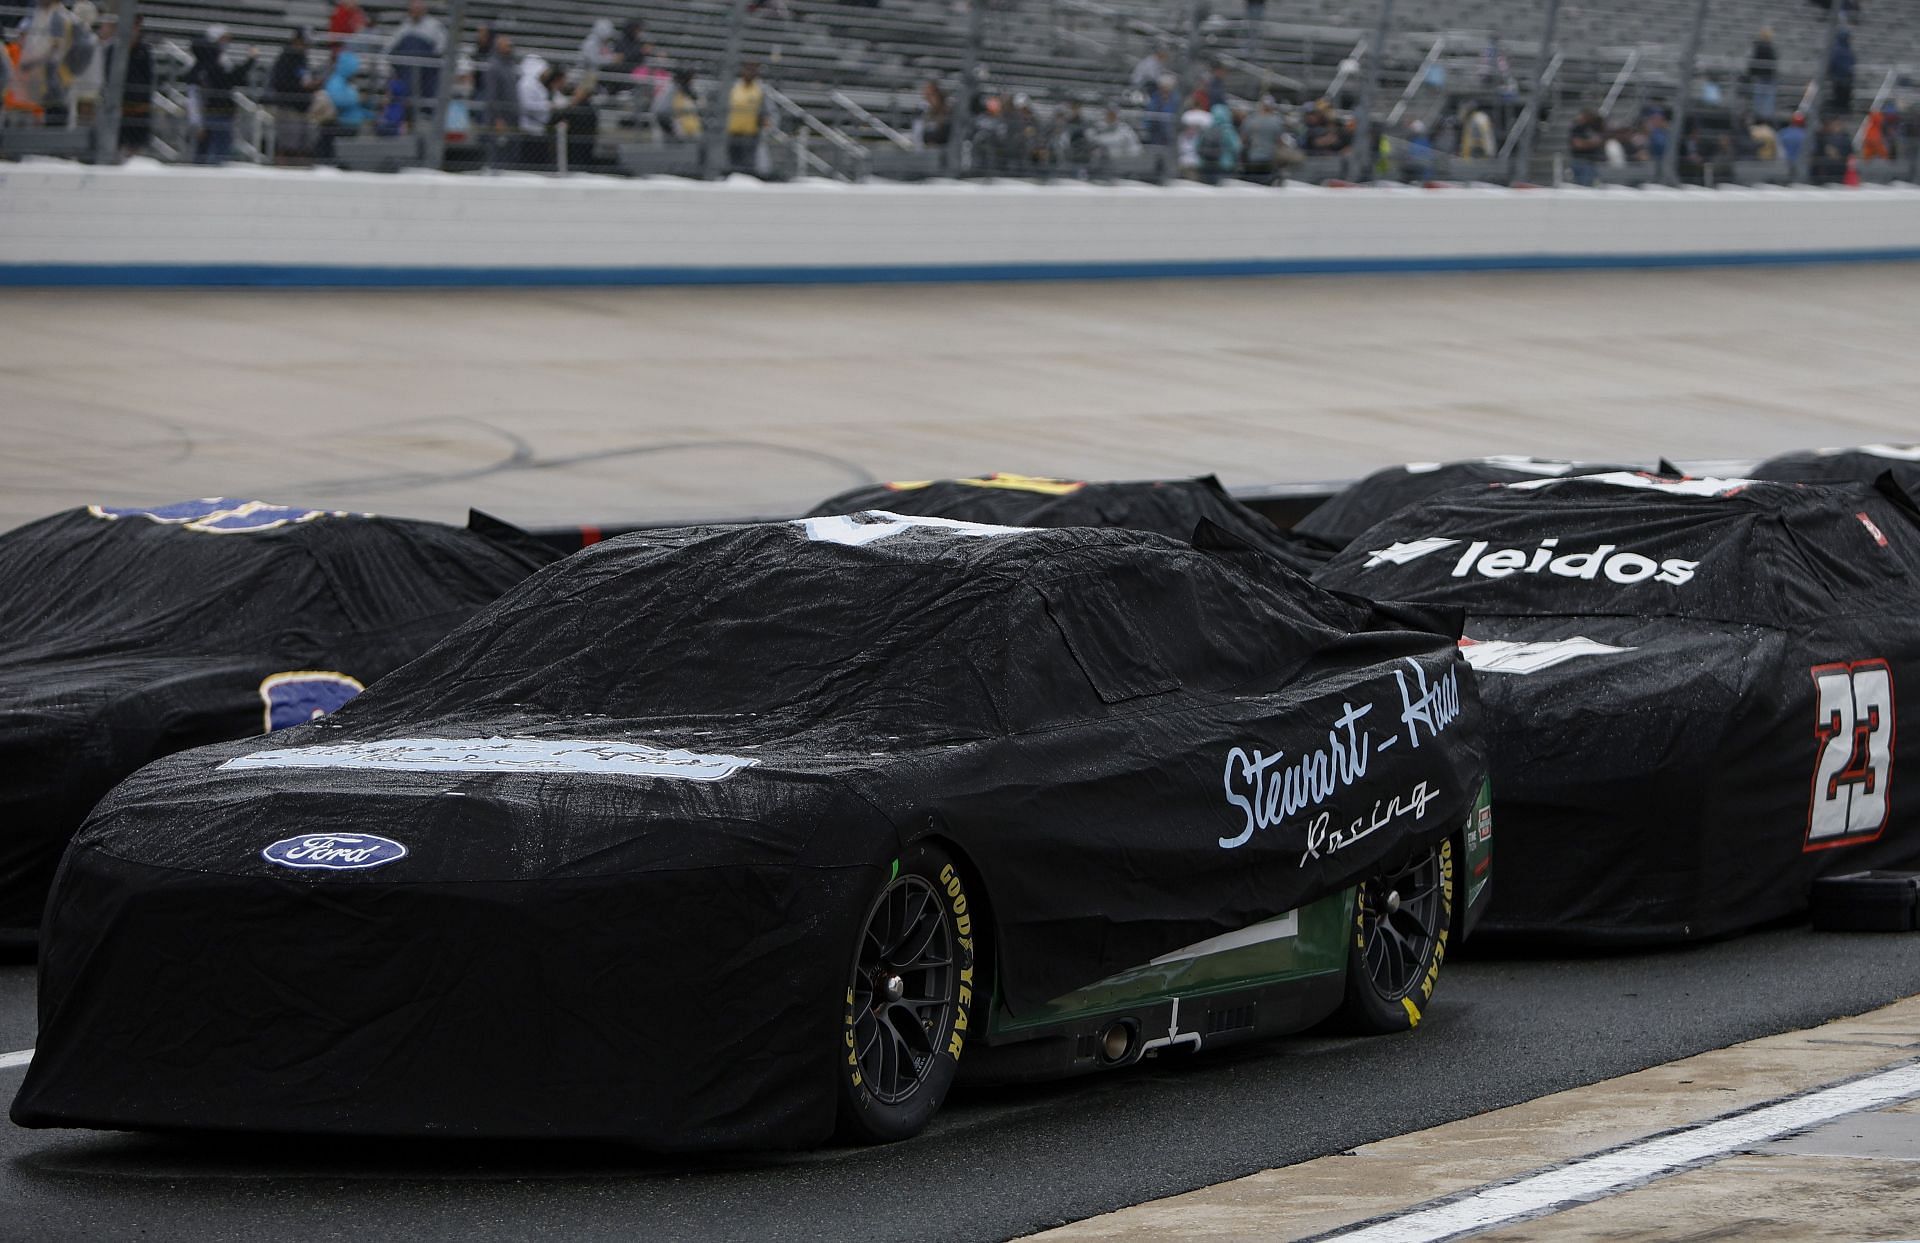 Cars sit covered on the grid during a rain delay in the NASCAR Cup Series DuraMAX Drydene 400 presented by RelaDyne at Dover Motor Speedway (Photo by Sean Gardner/Getty Images)